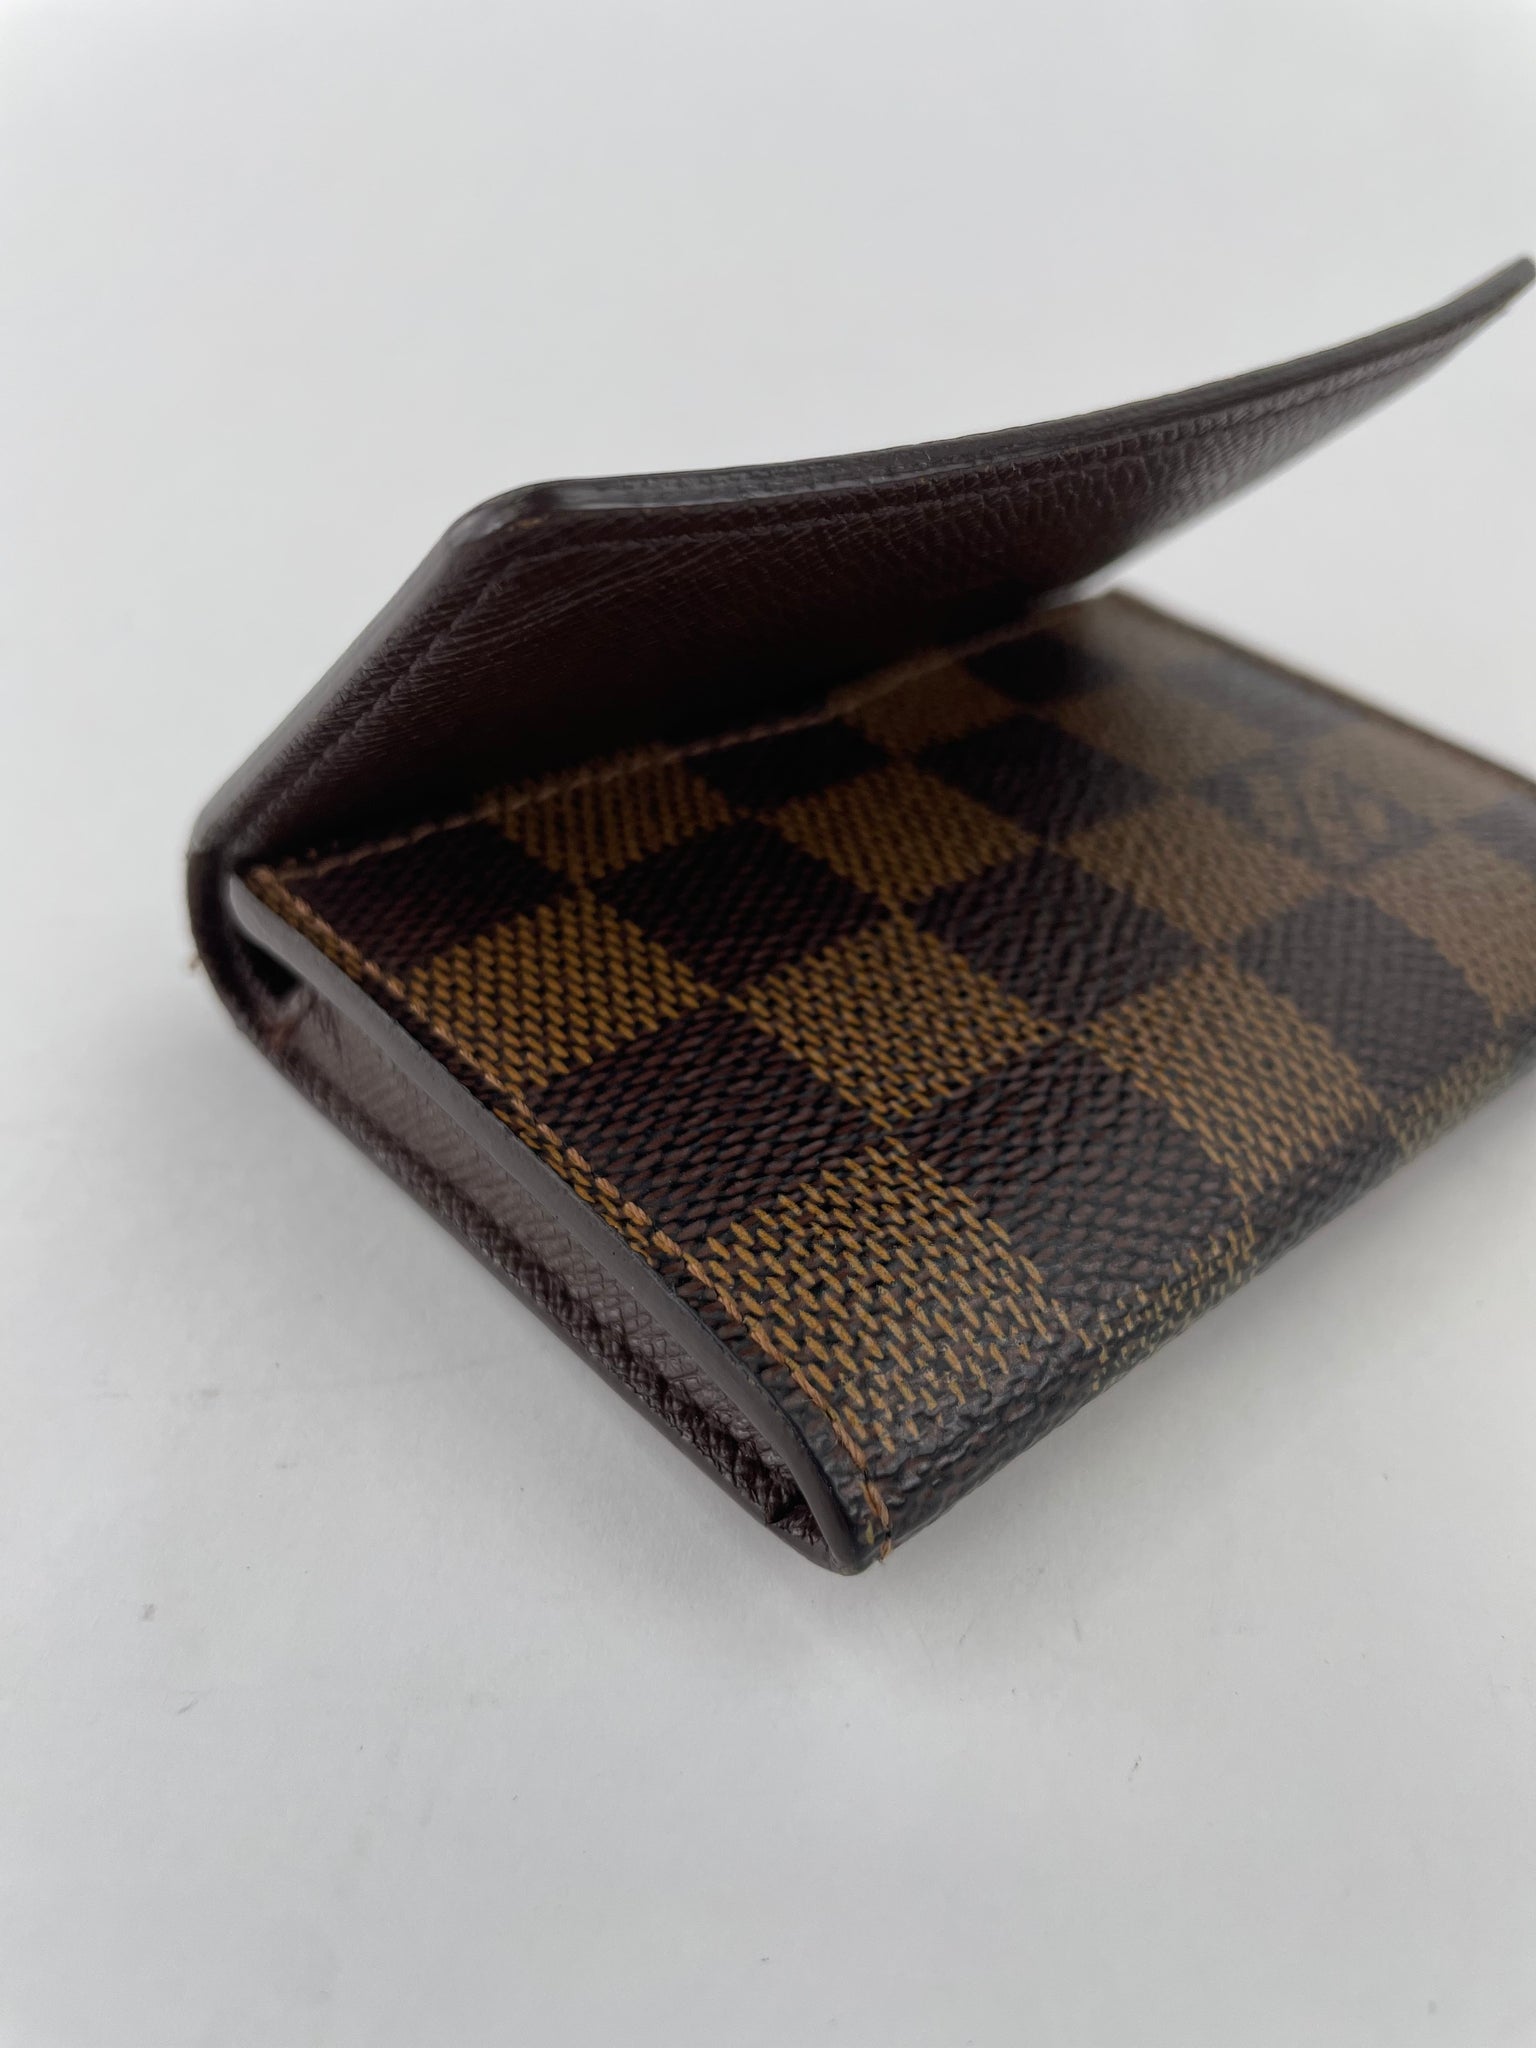 Louis Vuitton card case/ card holder with plastic inserts CT0998